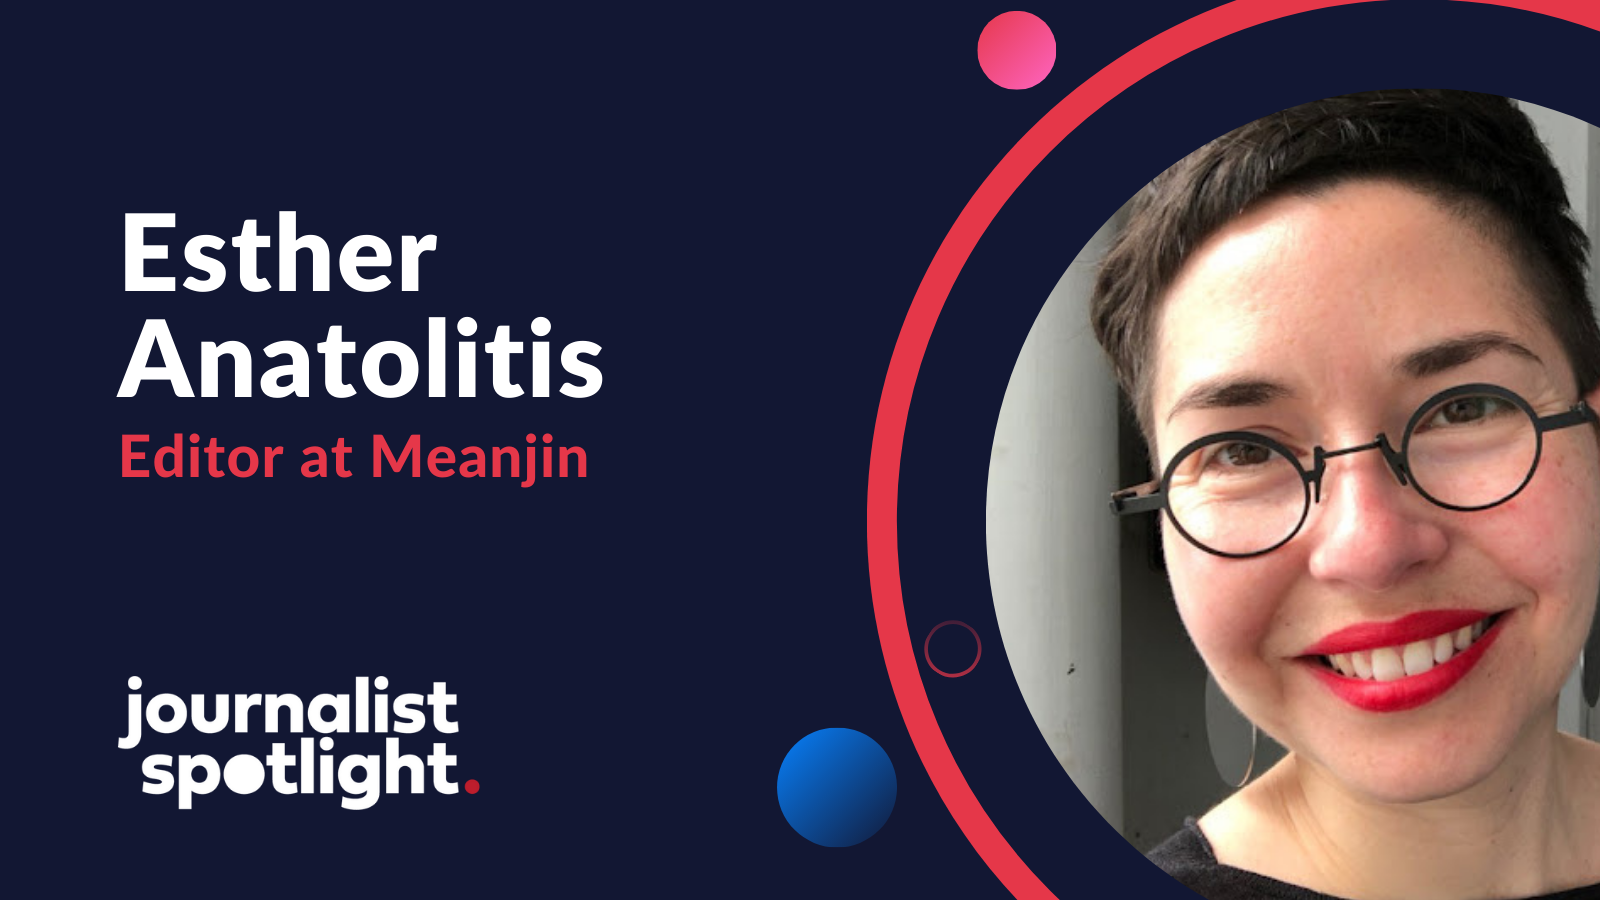 Journalist Spotlight | Interview with Esther Anatolitis, Editor at Meanjin